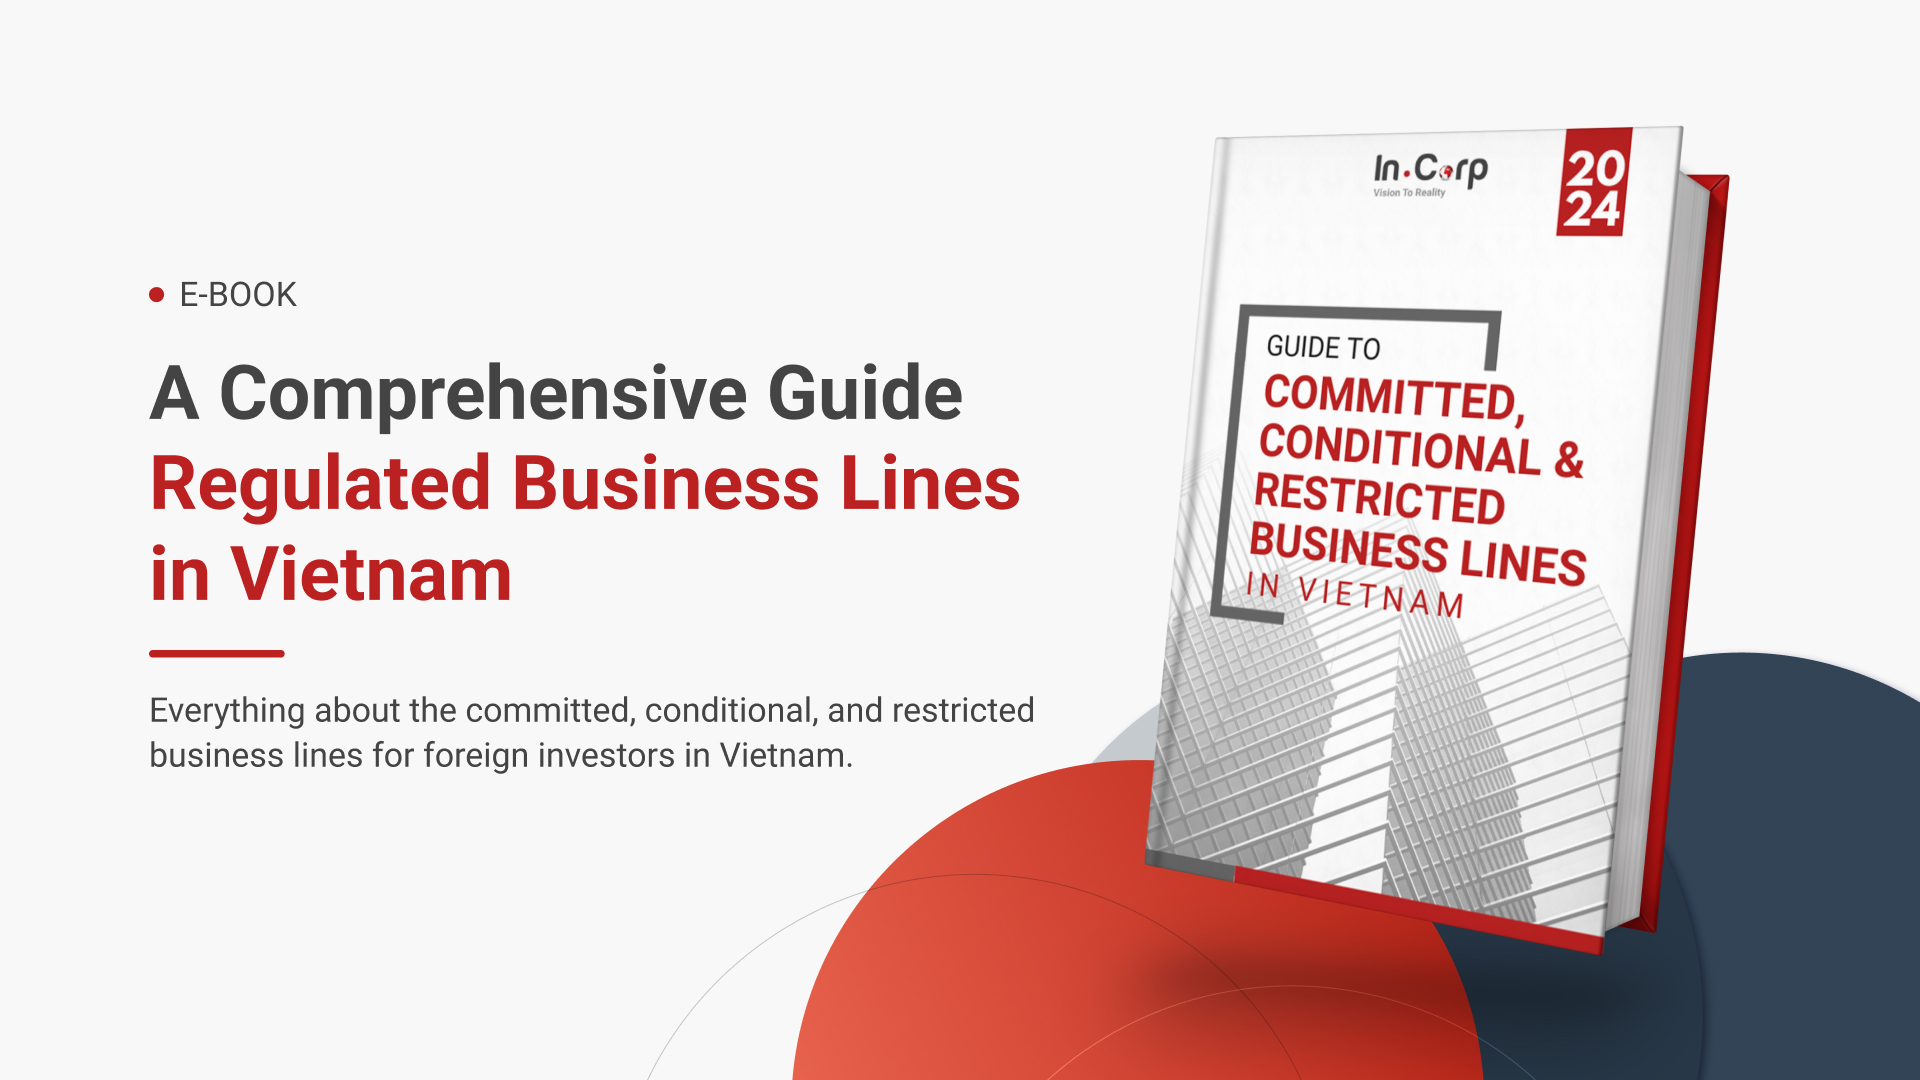 A Comprehensive Guide to Regulated Business Lines in Vietnam